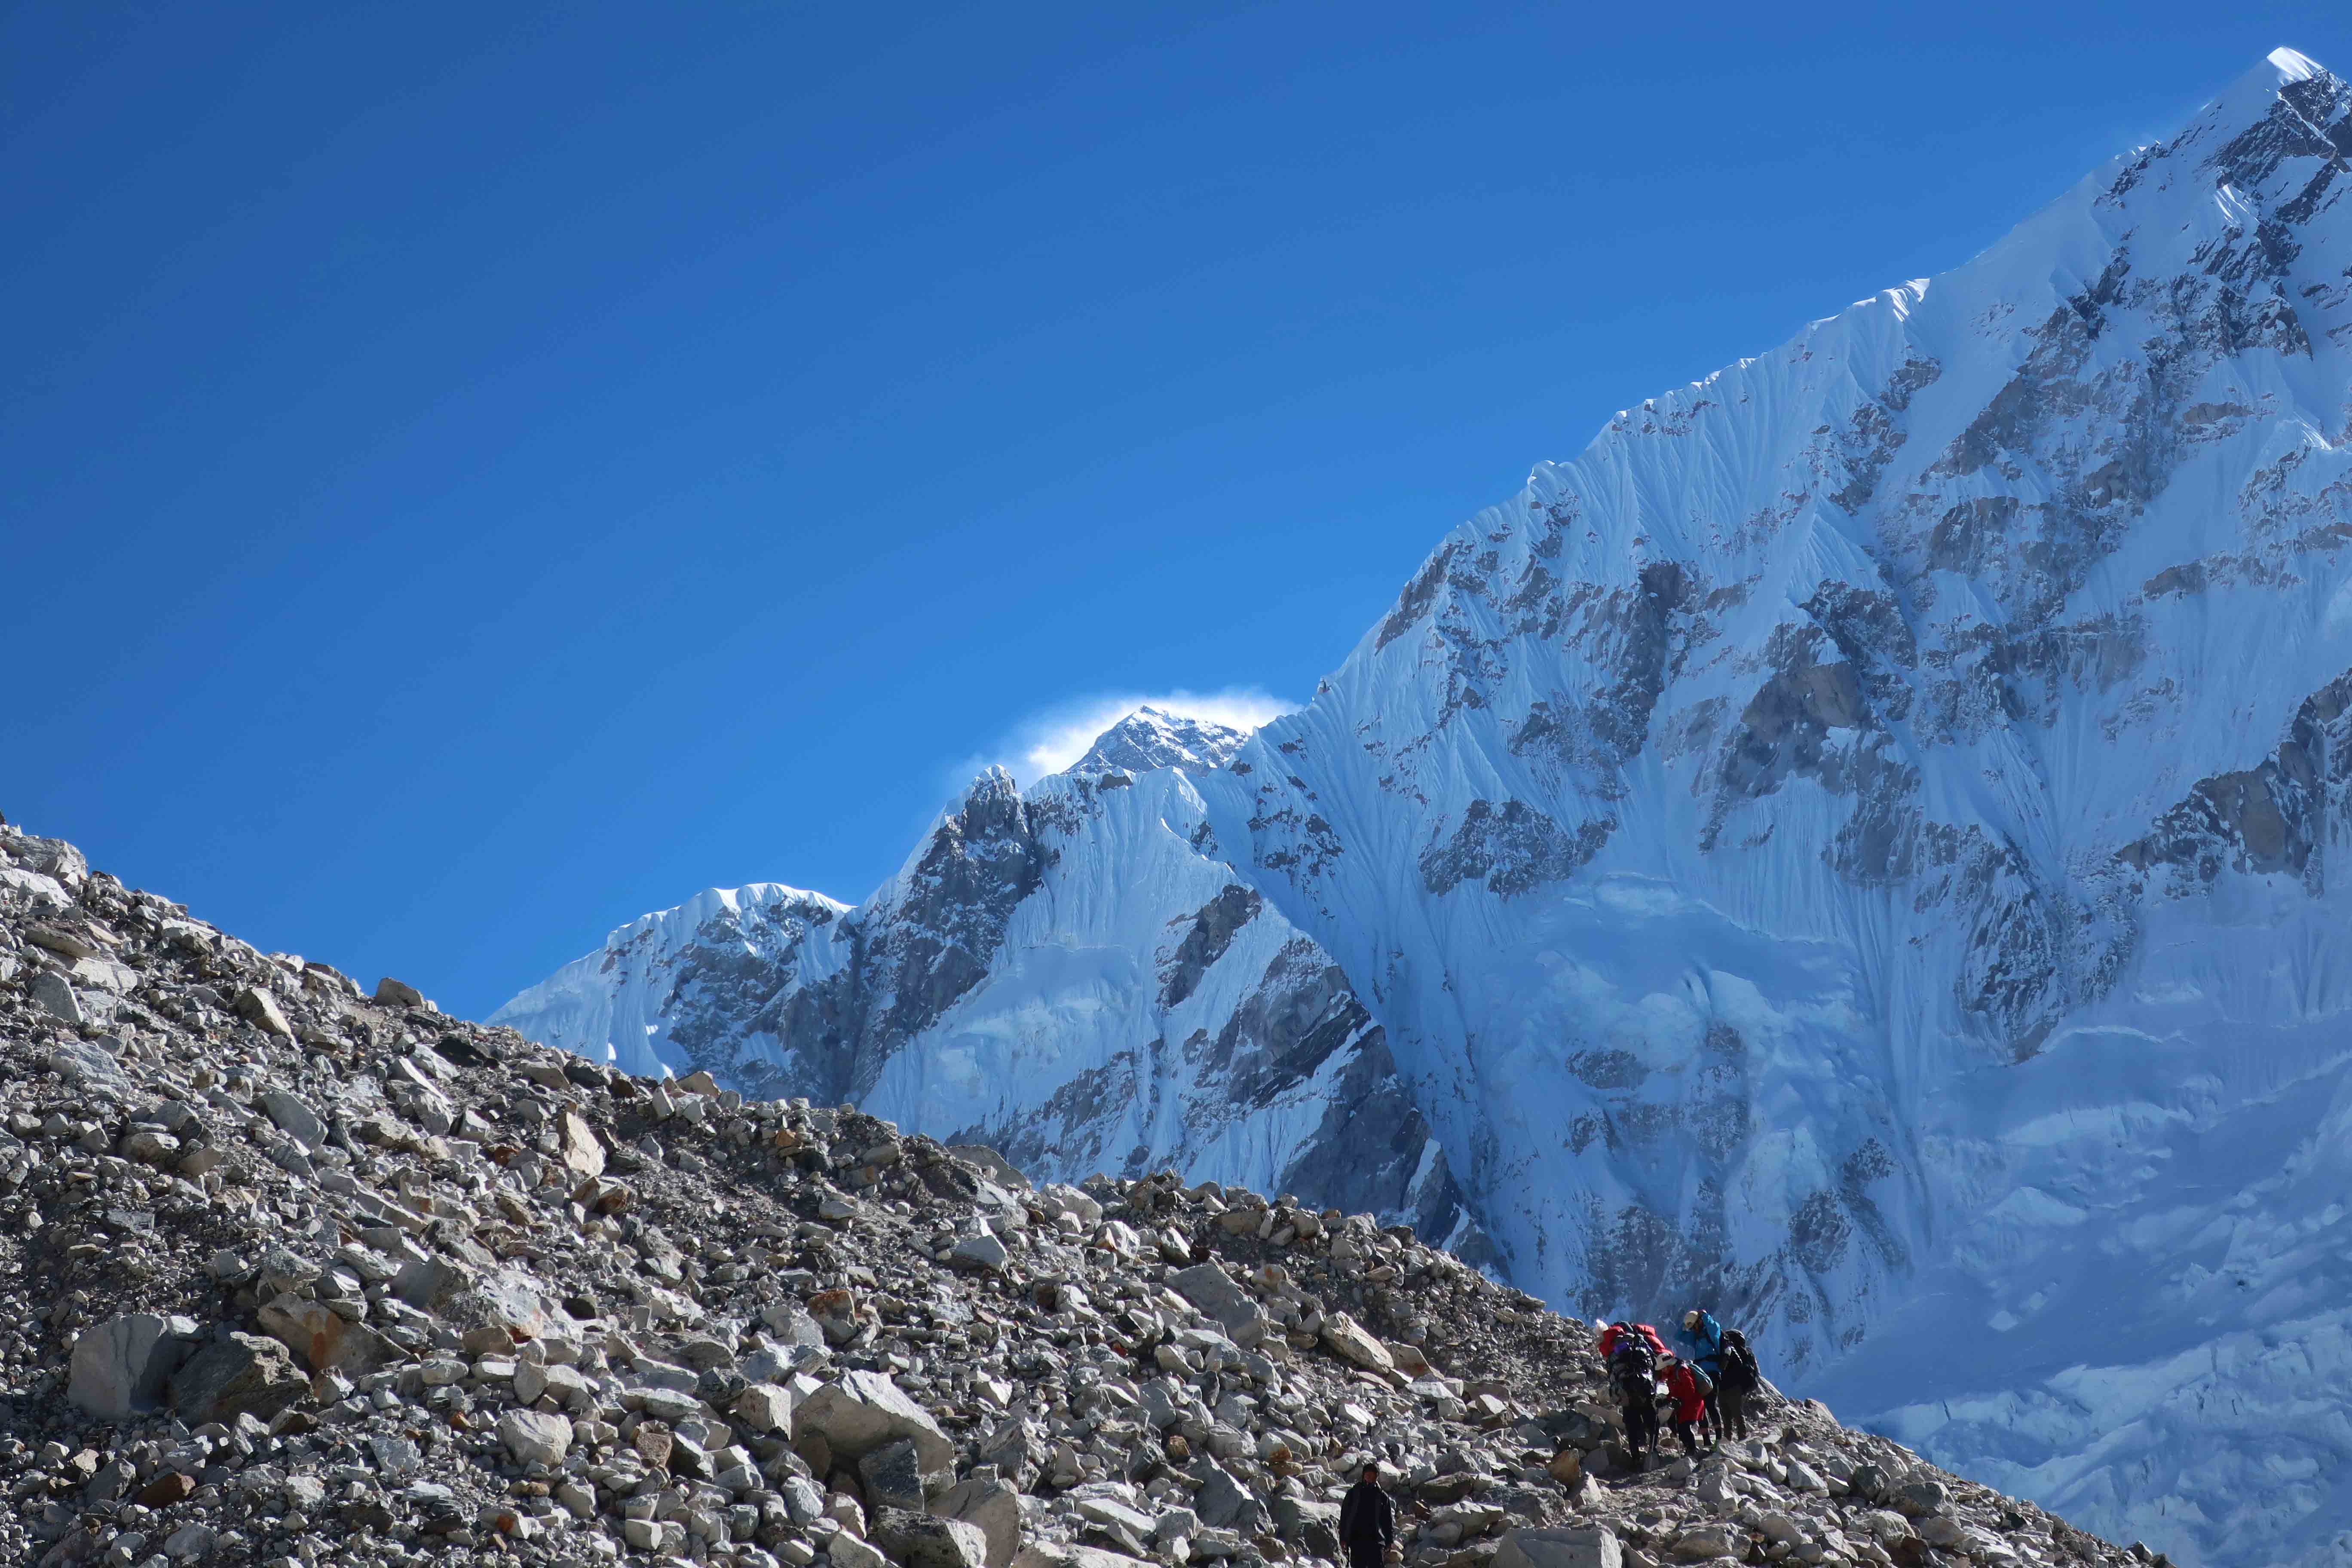 Mt. Everest peaking  on the trail to the Everest Base Camp, October 2018